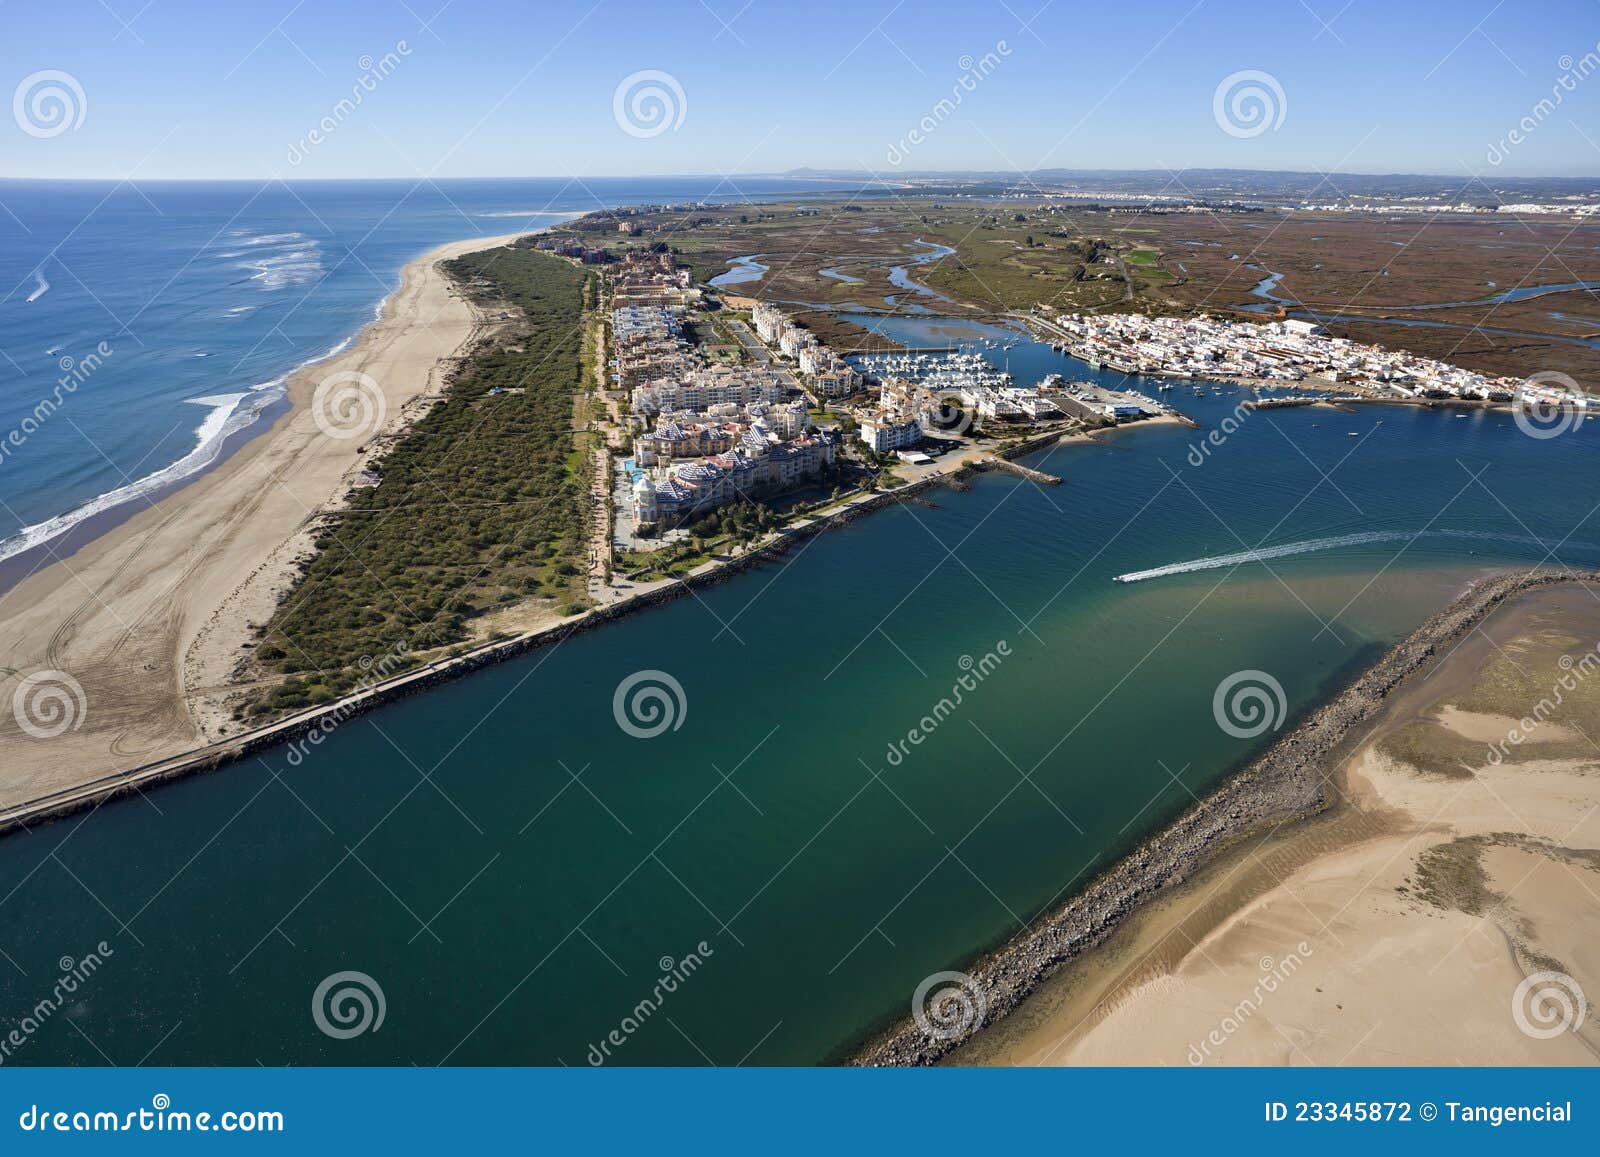 aerial view of the beach of isla canela